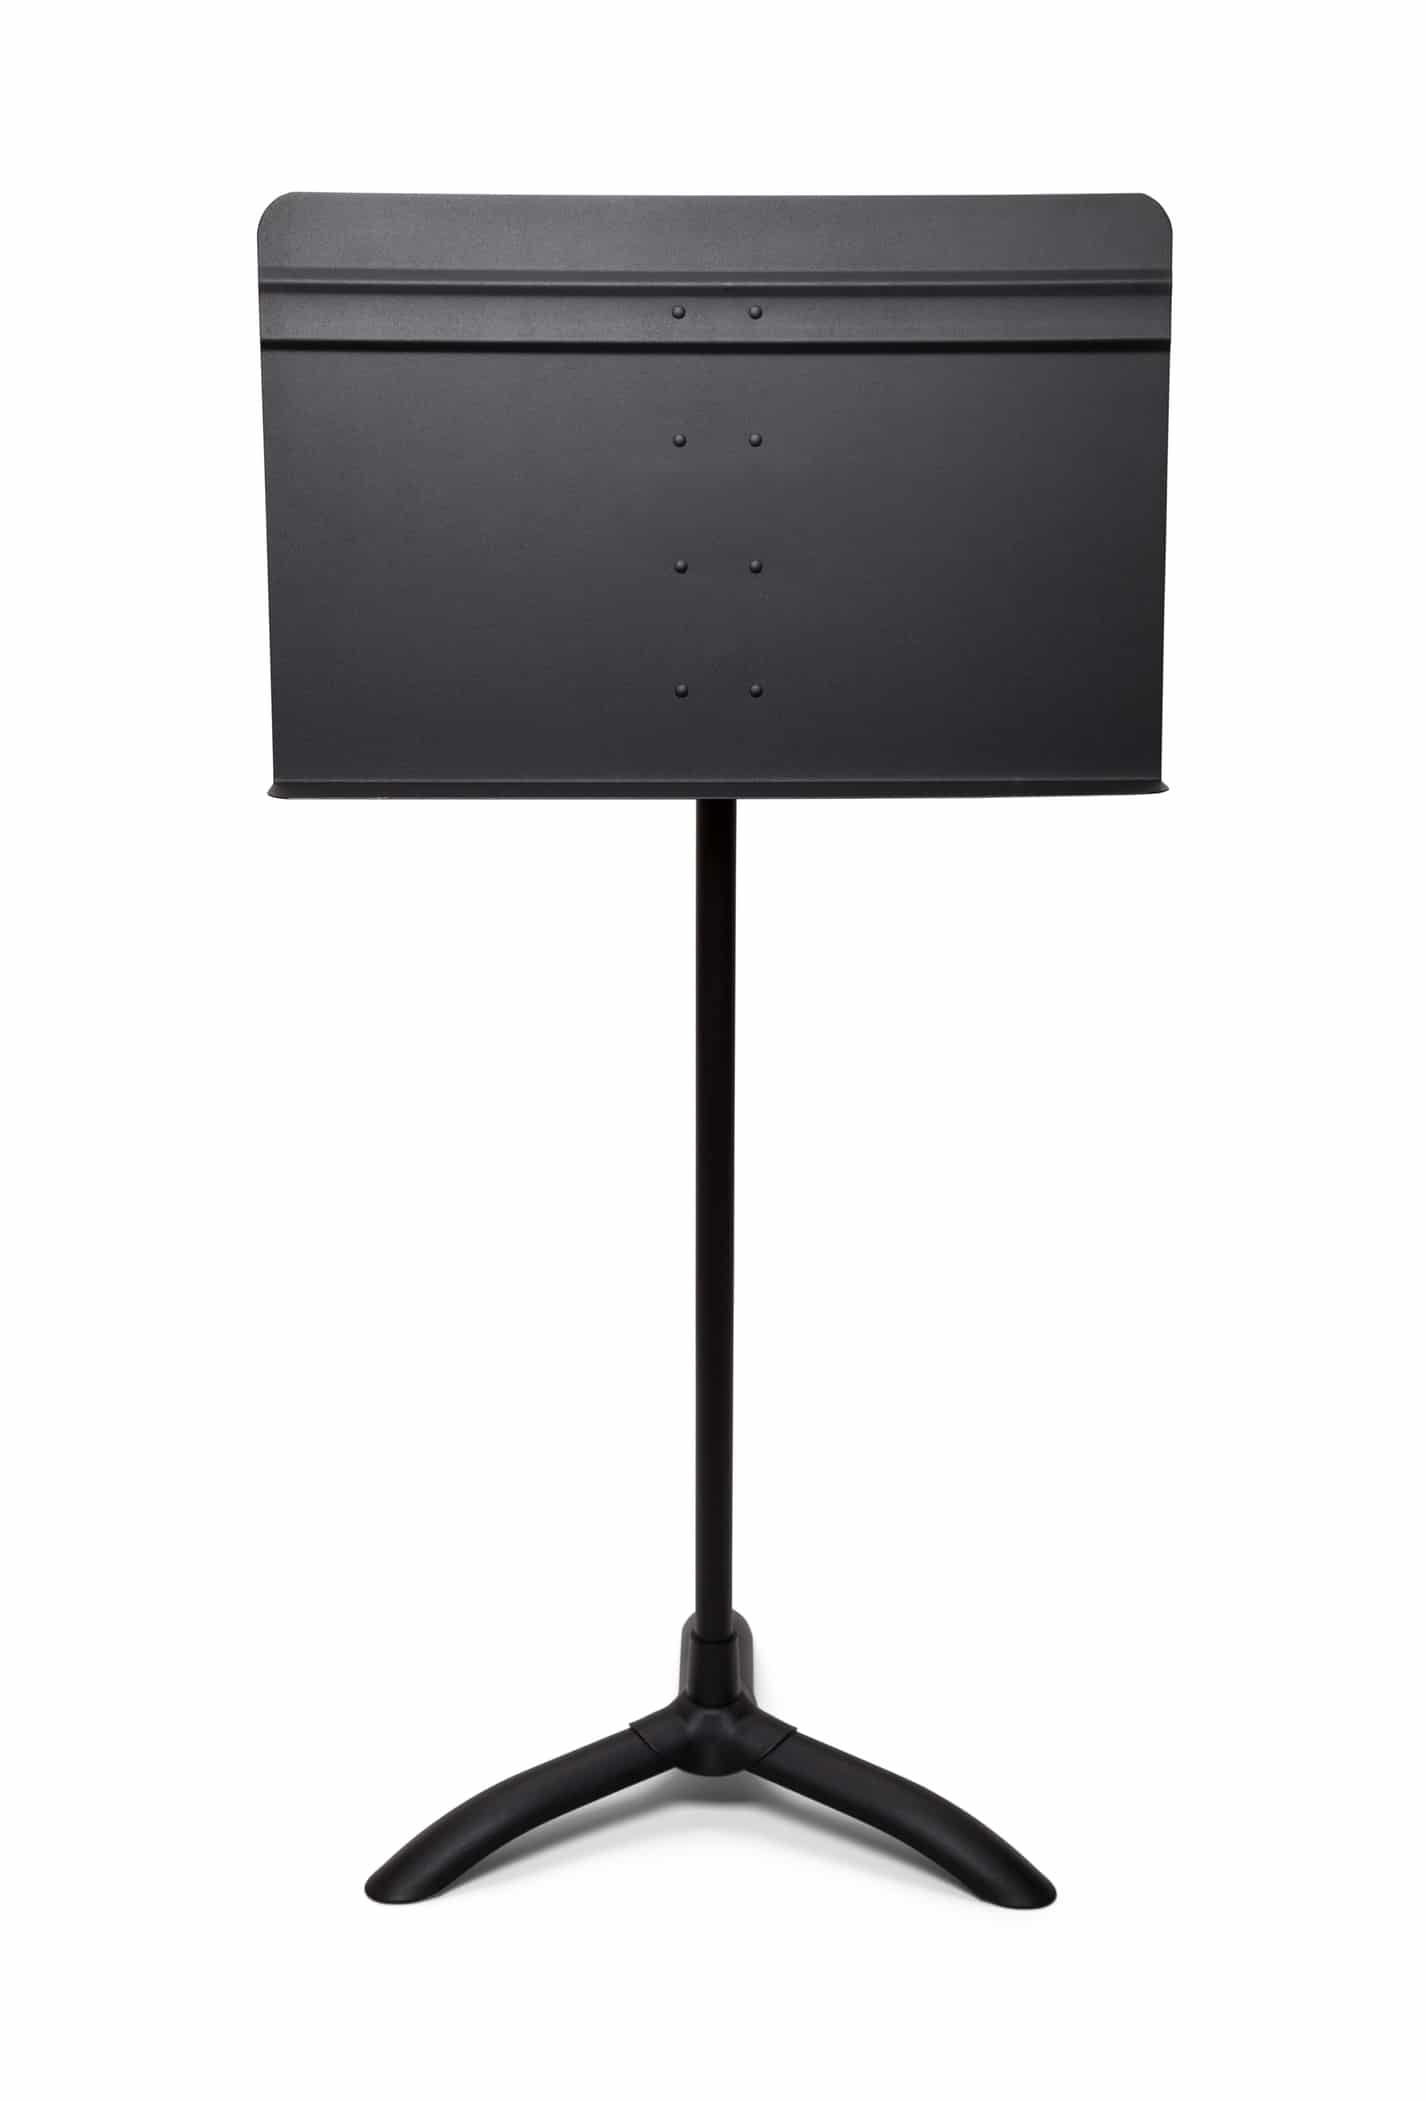 Black Music Stand Front View Isoated on White Background.